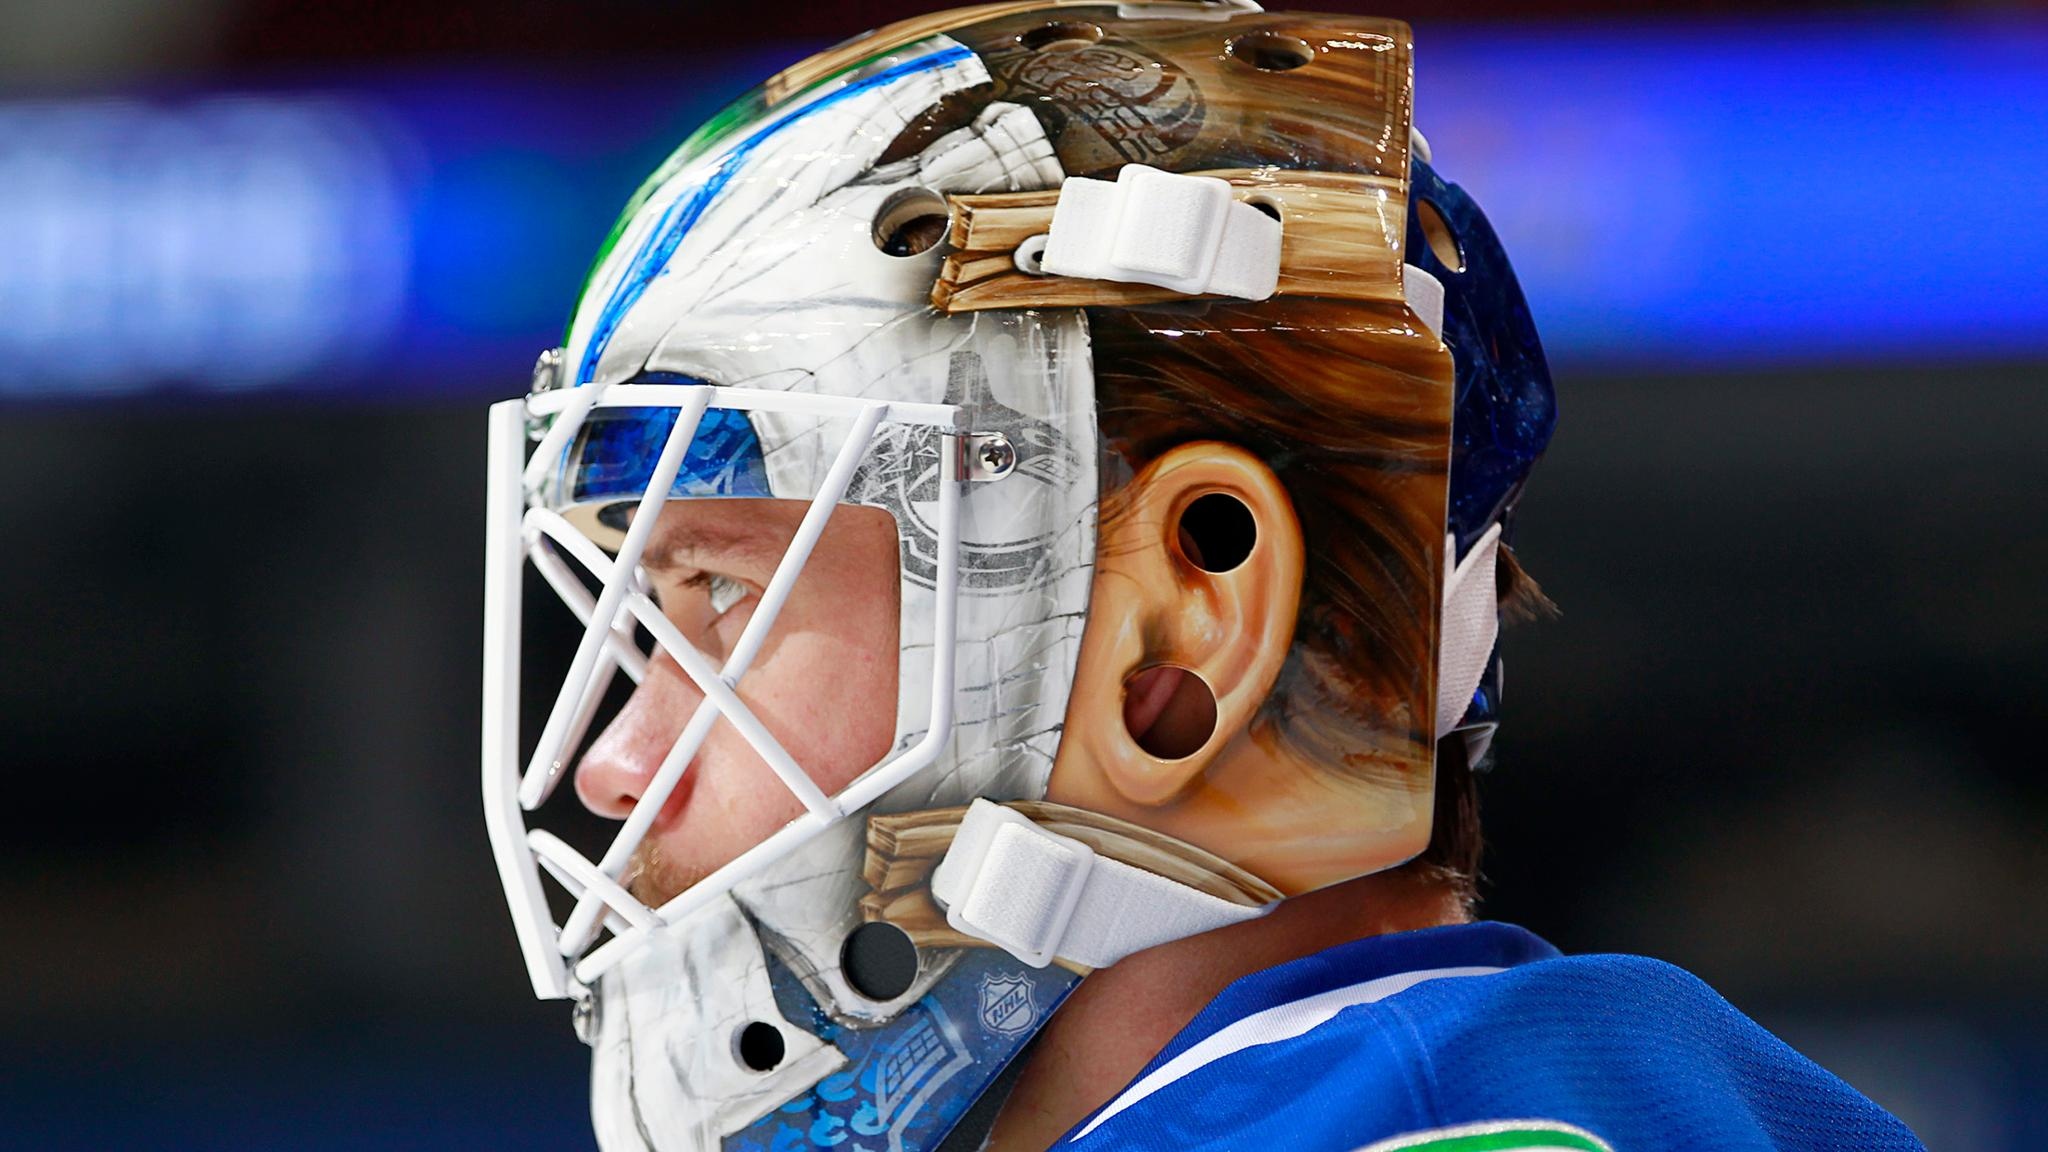 Jacob Markstrom from the Vancouver Canucks showing off his modified "Jason" mask